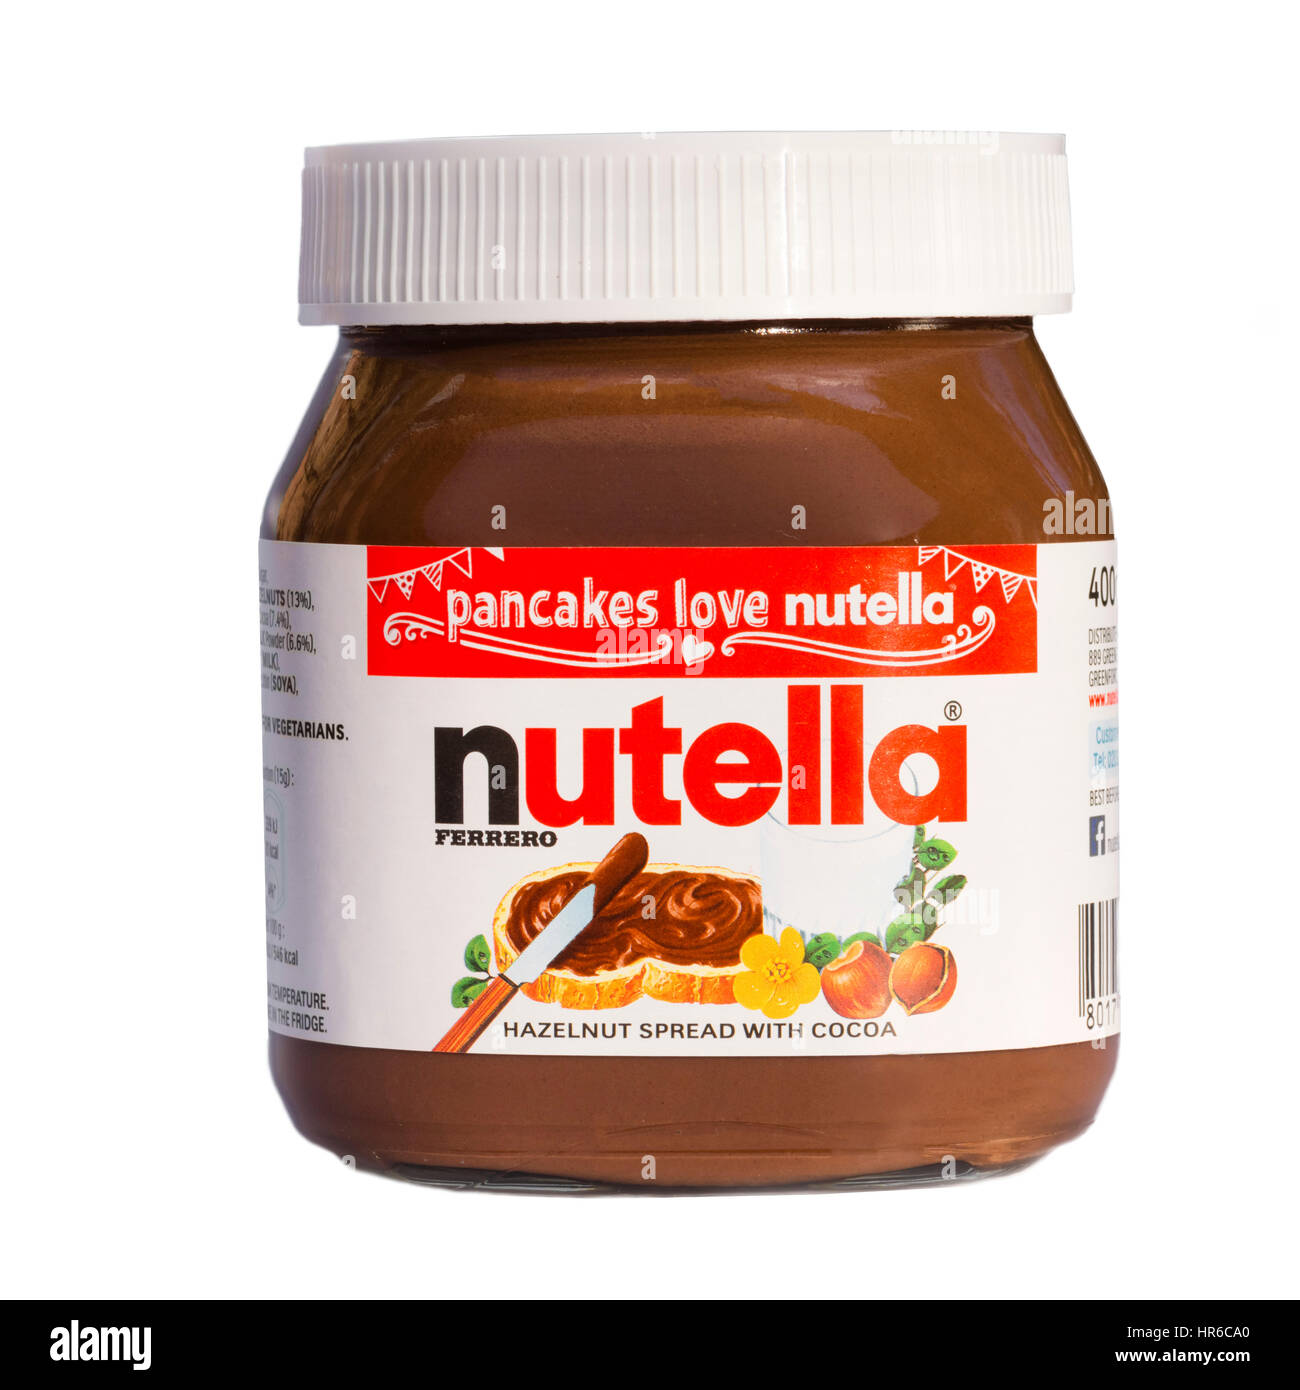 Nutella jar cut out or isolated against a white background. Stock Photo